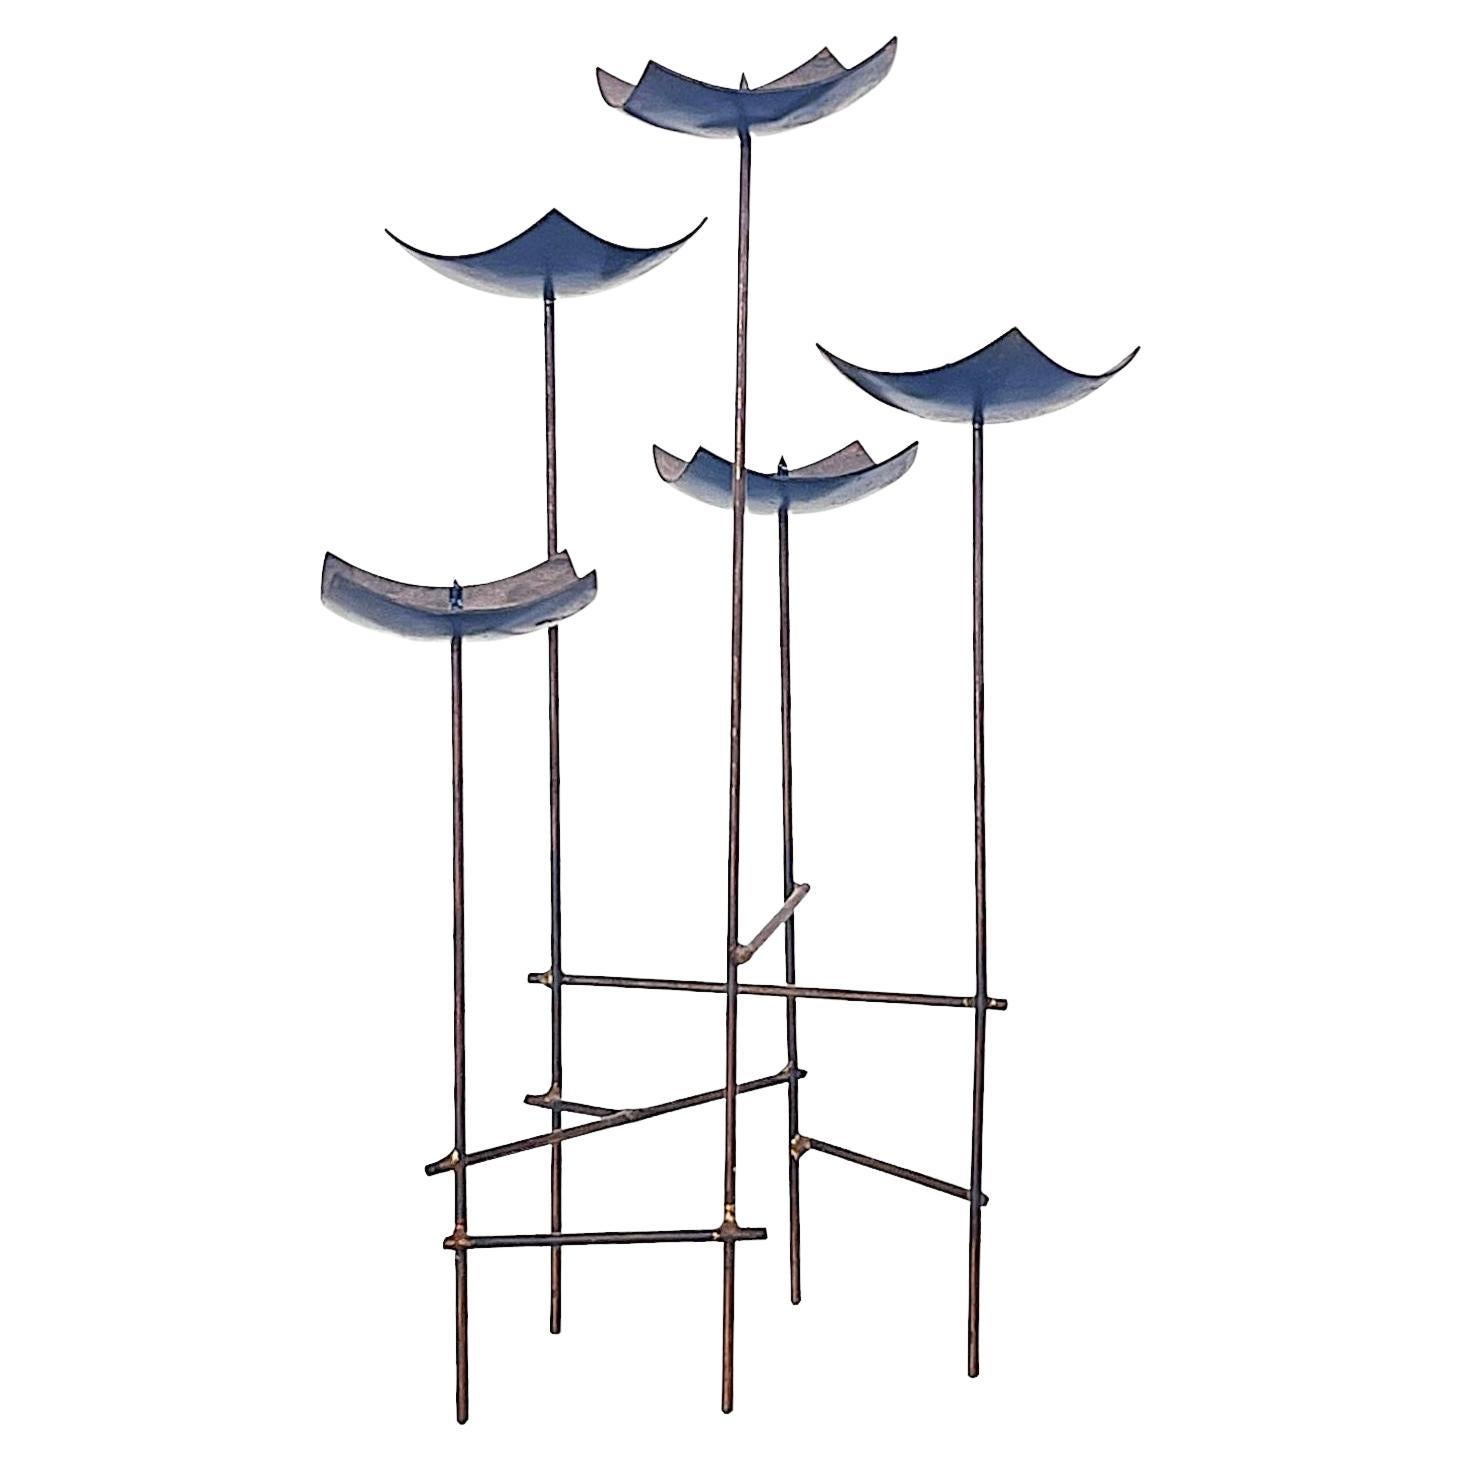 Brutalist sculptural bronze candelabra, artist unknown, Bronx, NY, c. 1950’s
Richly patinated, hand-forged 

This item is part of the CABINE x WILDCRAFT MODERN Caumsett Preservation Collection - 10% of sales of The Preservation Collection will be